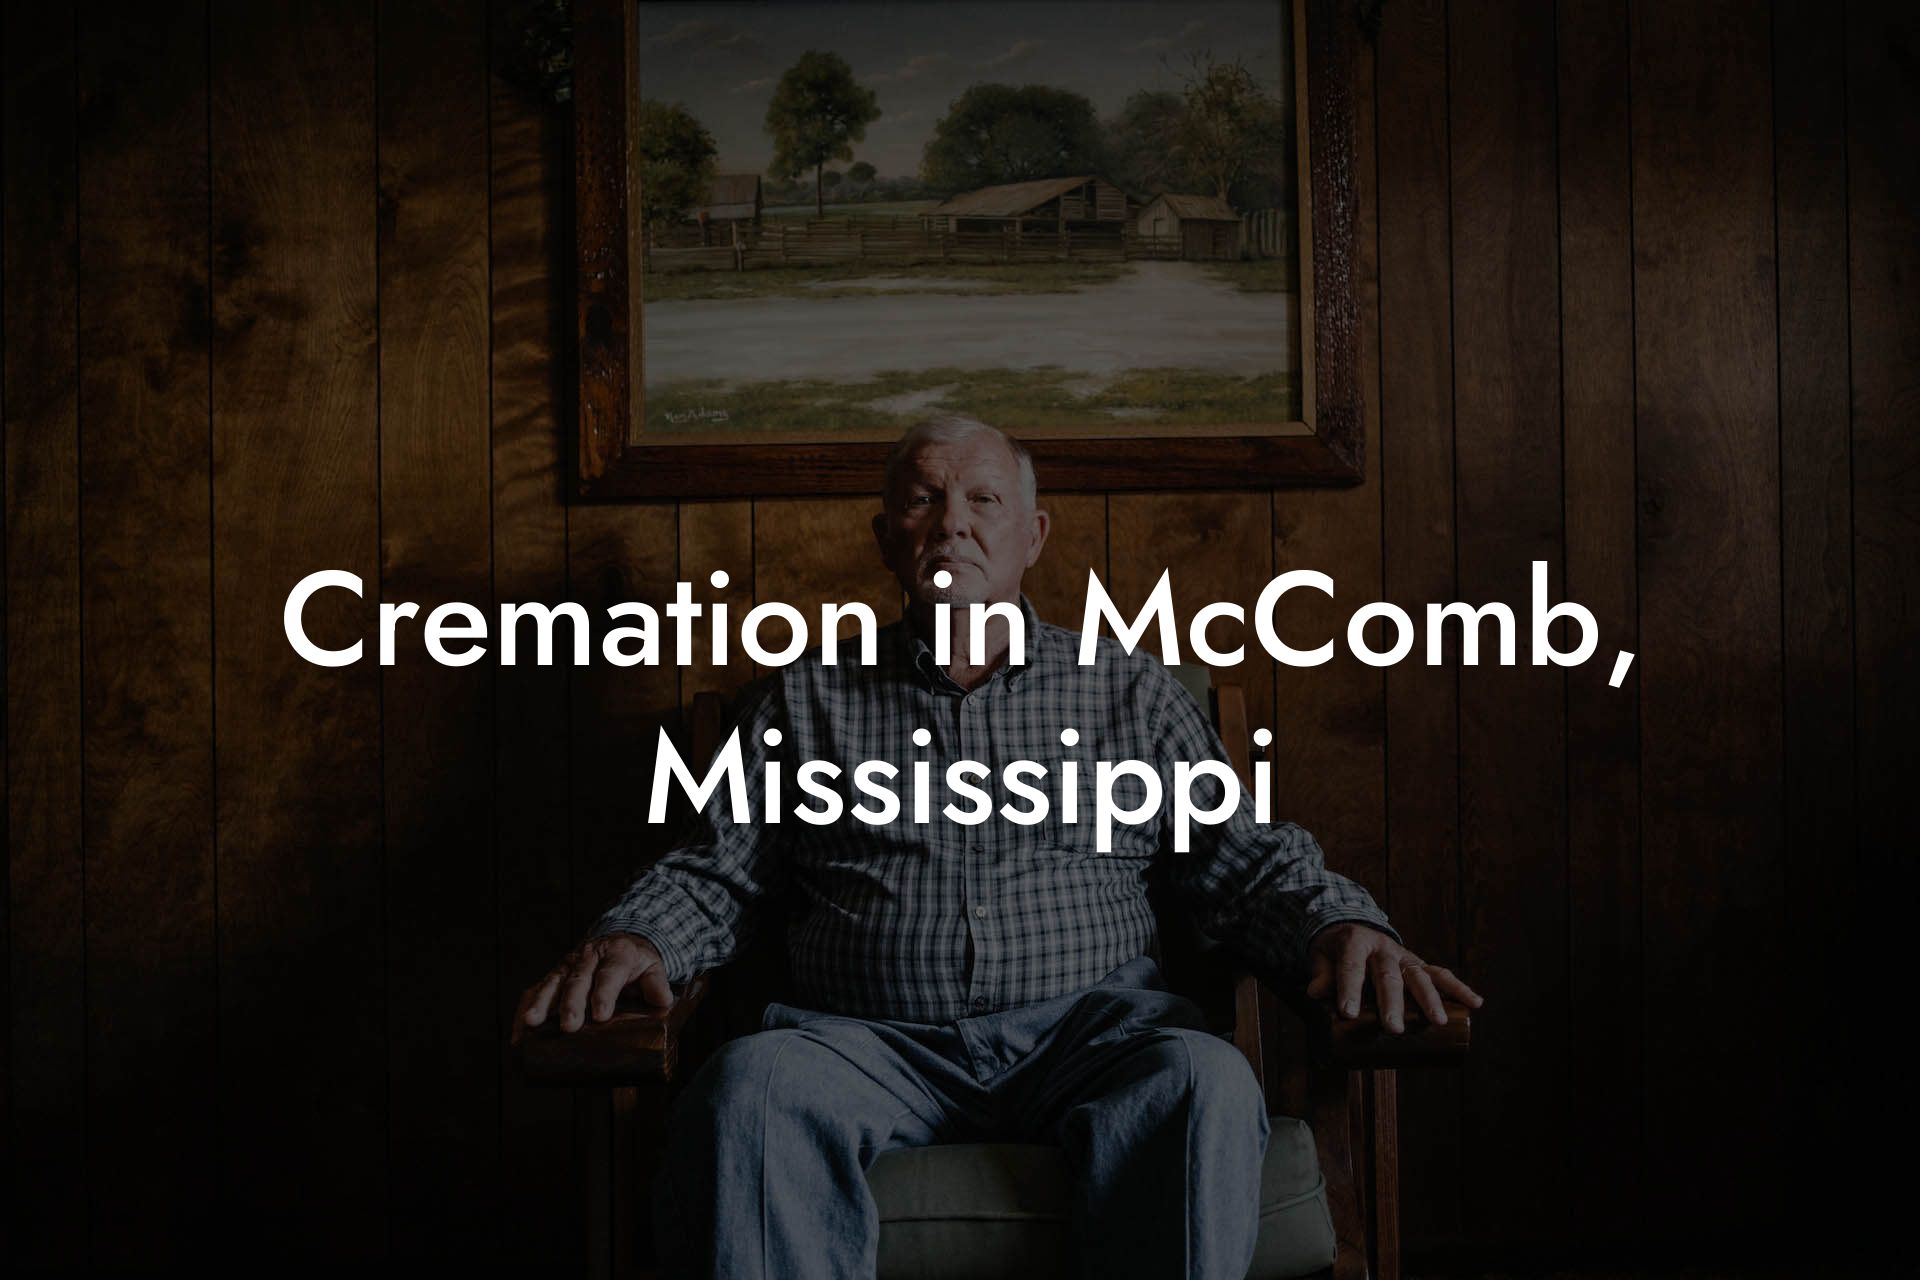 Cremation in McComb, Mississippi